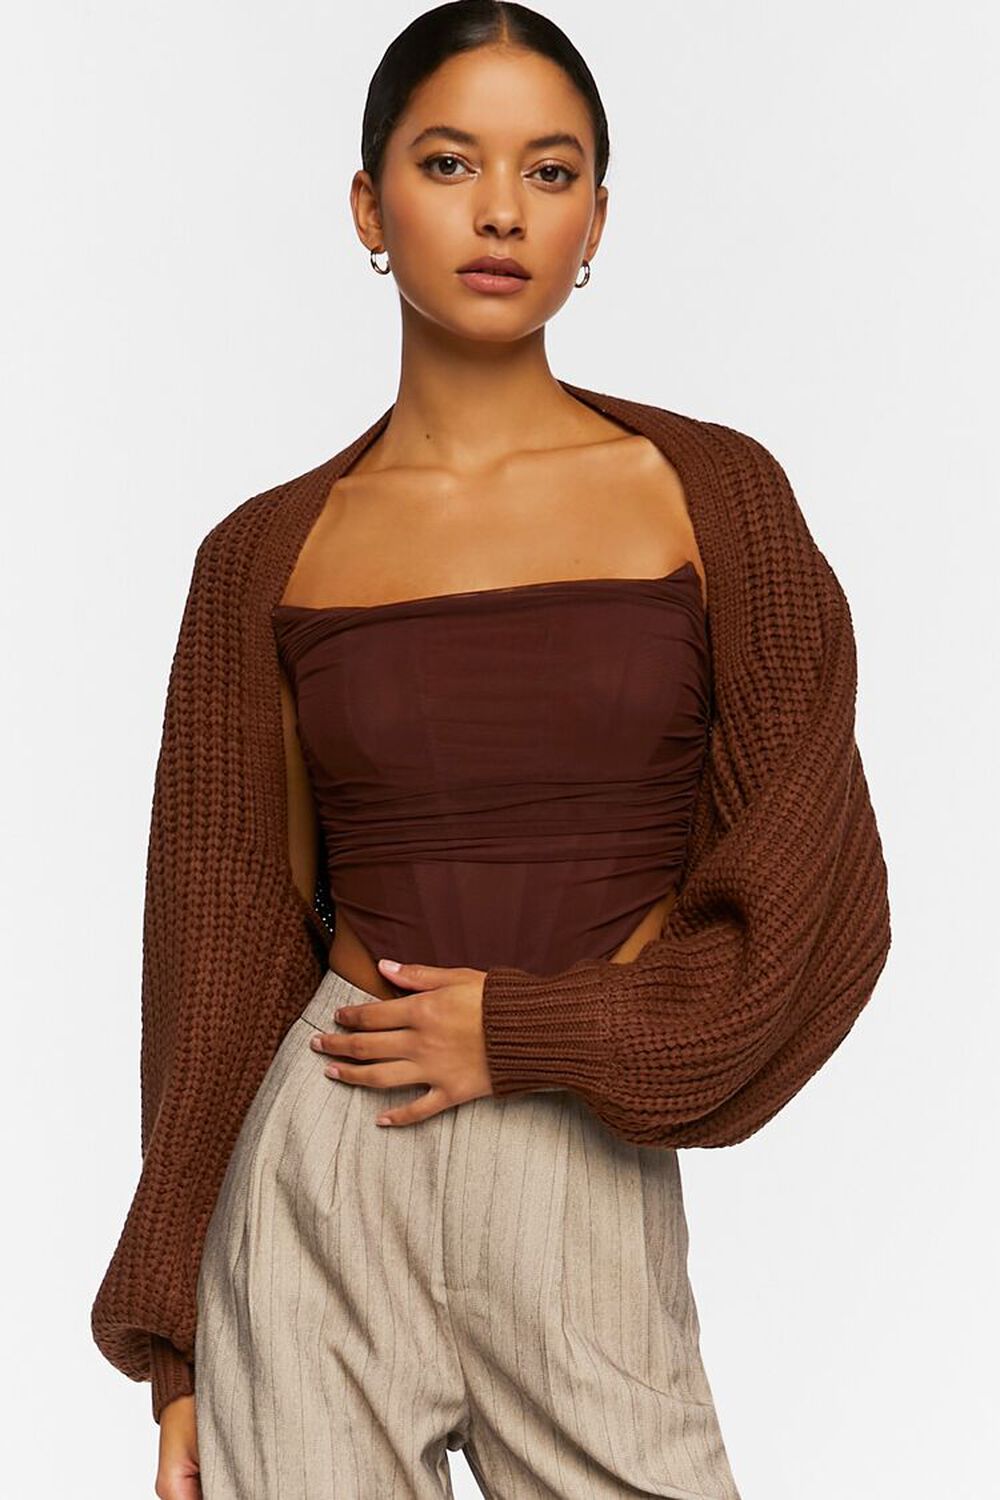 BROWN Batwing Open-Front Cardigan Sweater, image 1